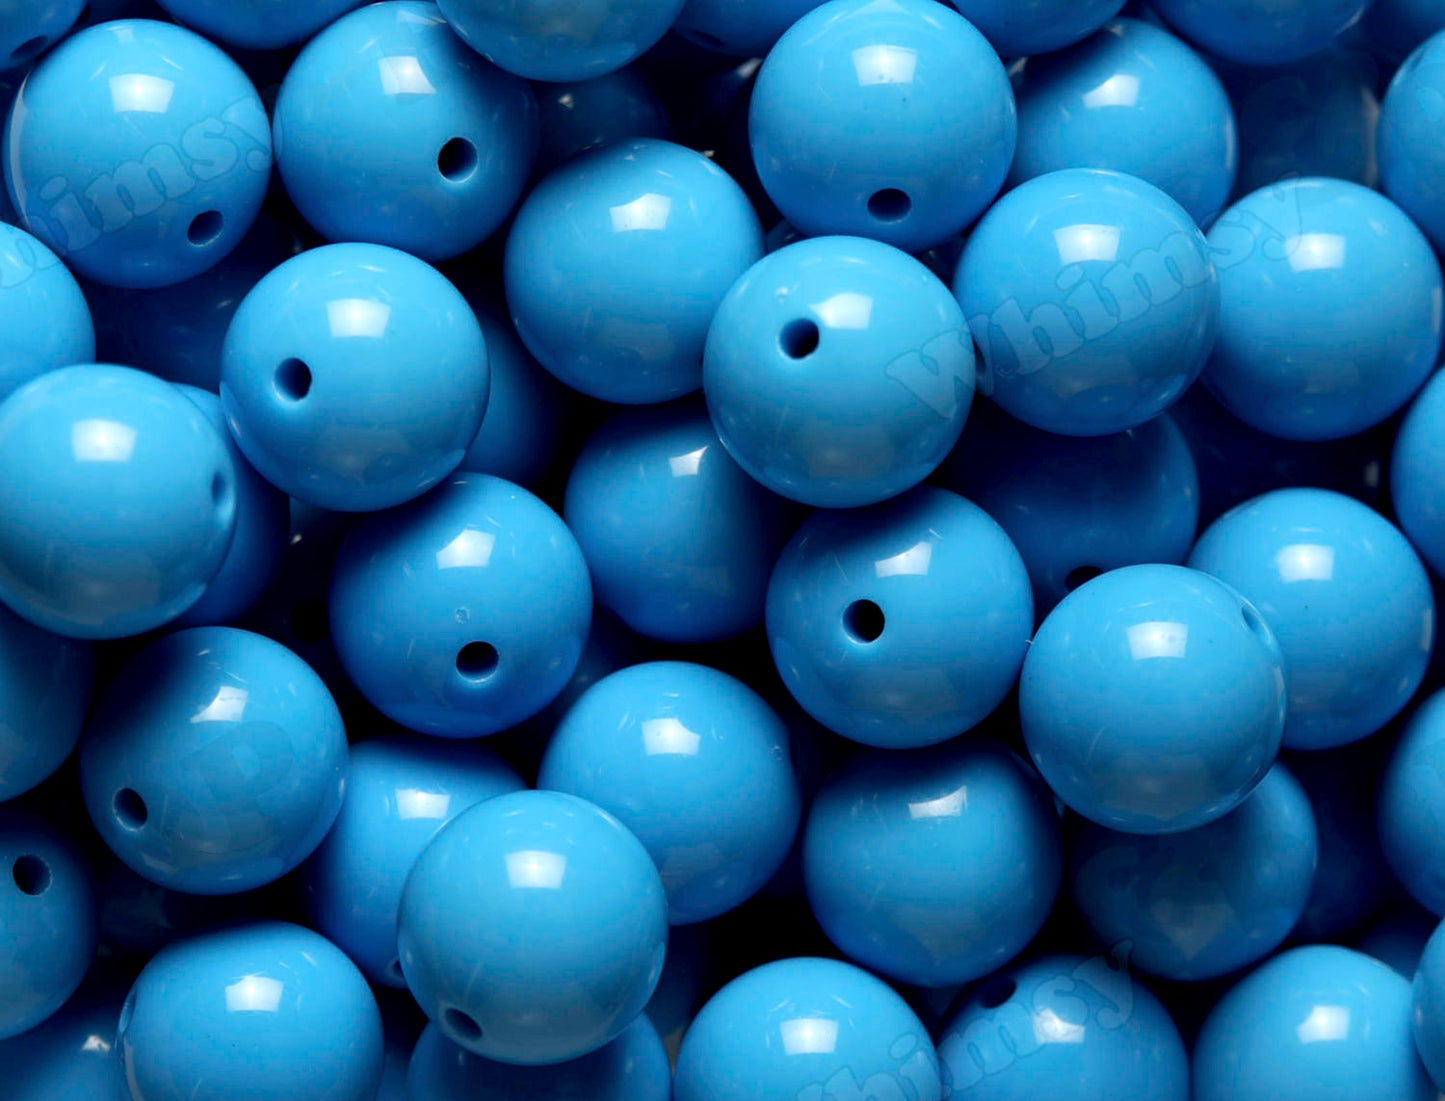 Blue 20mm Solid Bubblegum Beads for DIY Jewelry by WhimsyandPOP